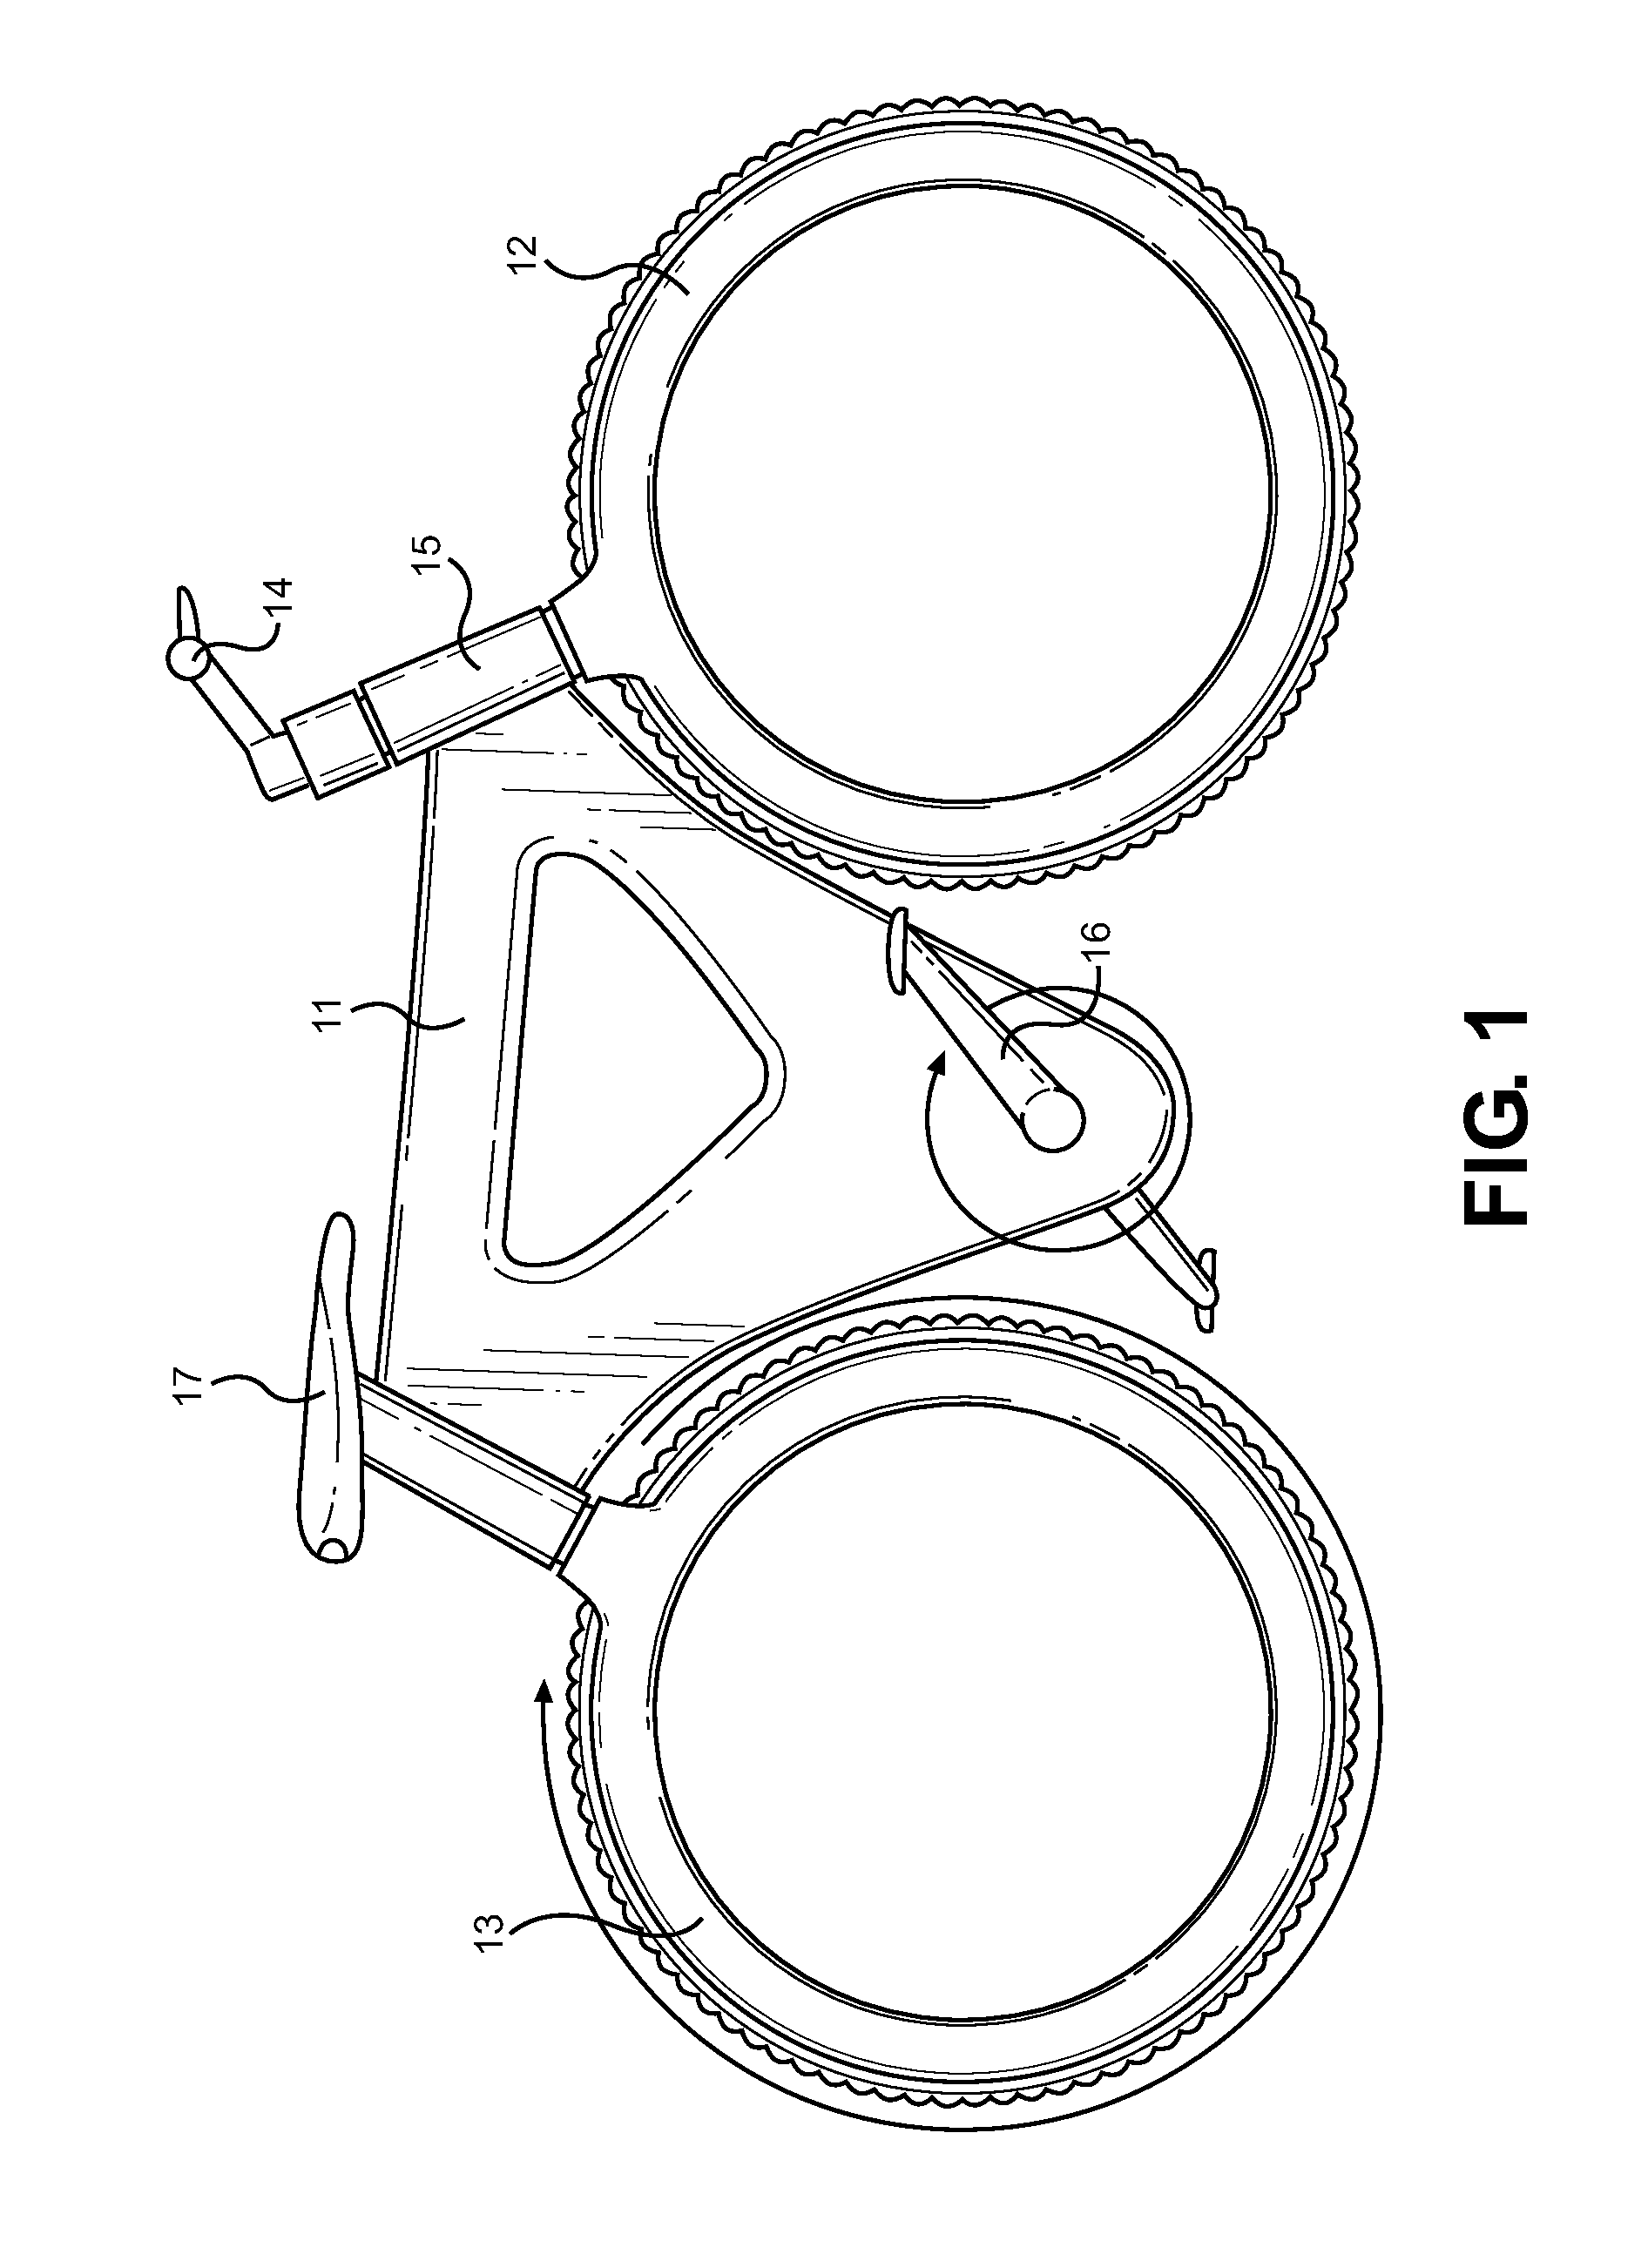 Bicycle Device with Direct Drive Transmission and Hubless Wheels